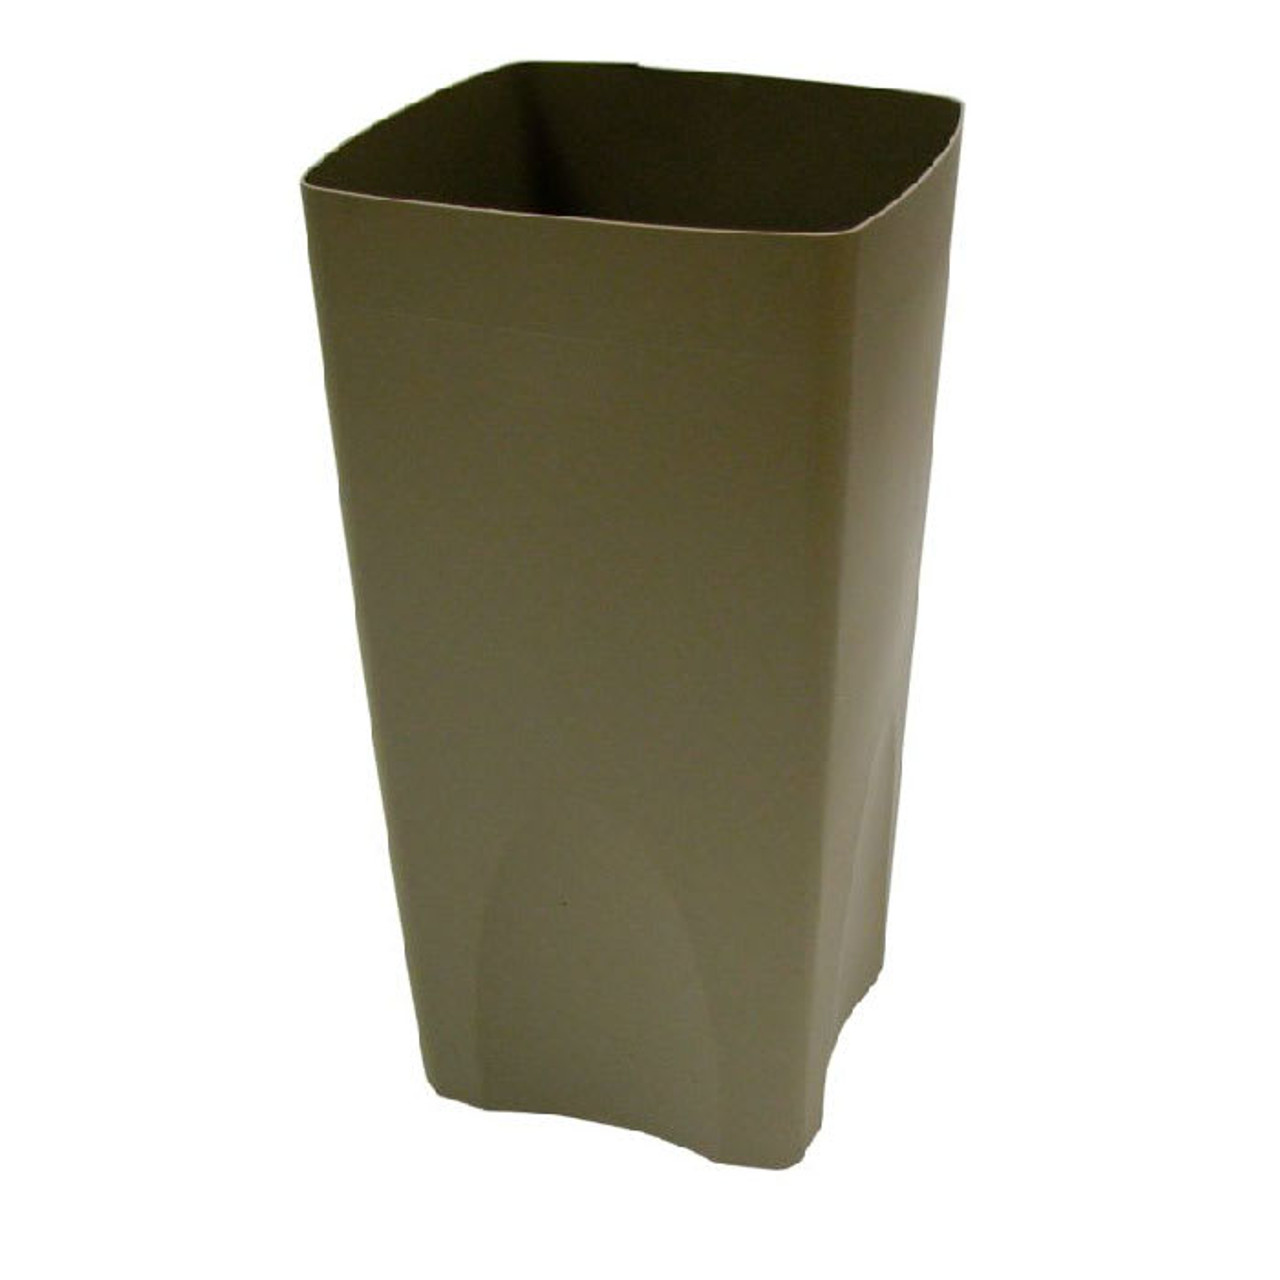 Rubbermaid Rigid Liner for Plaza Containers - Beige